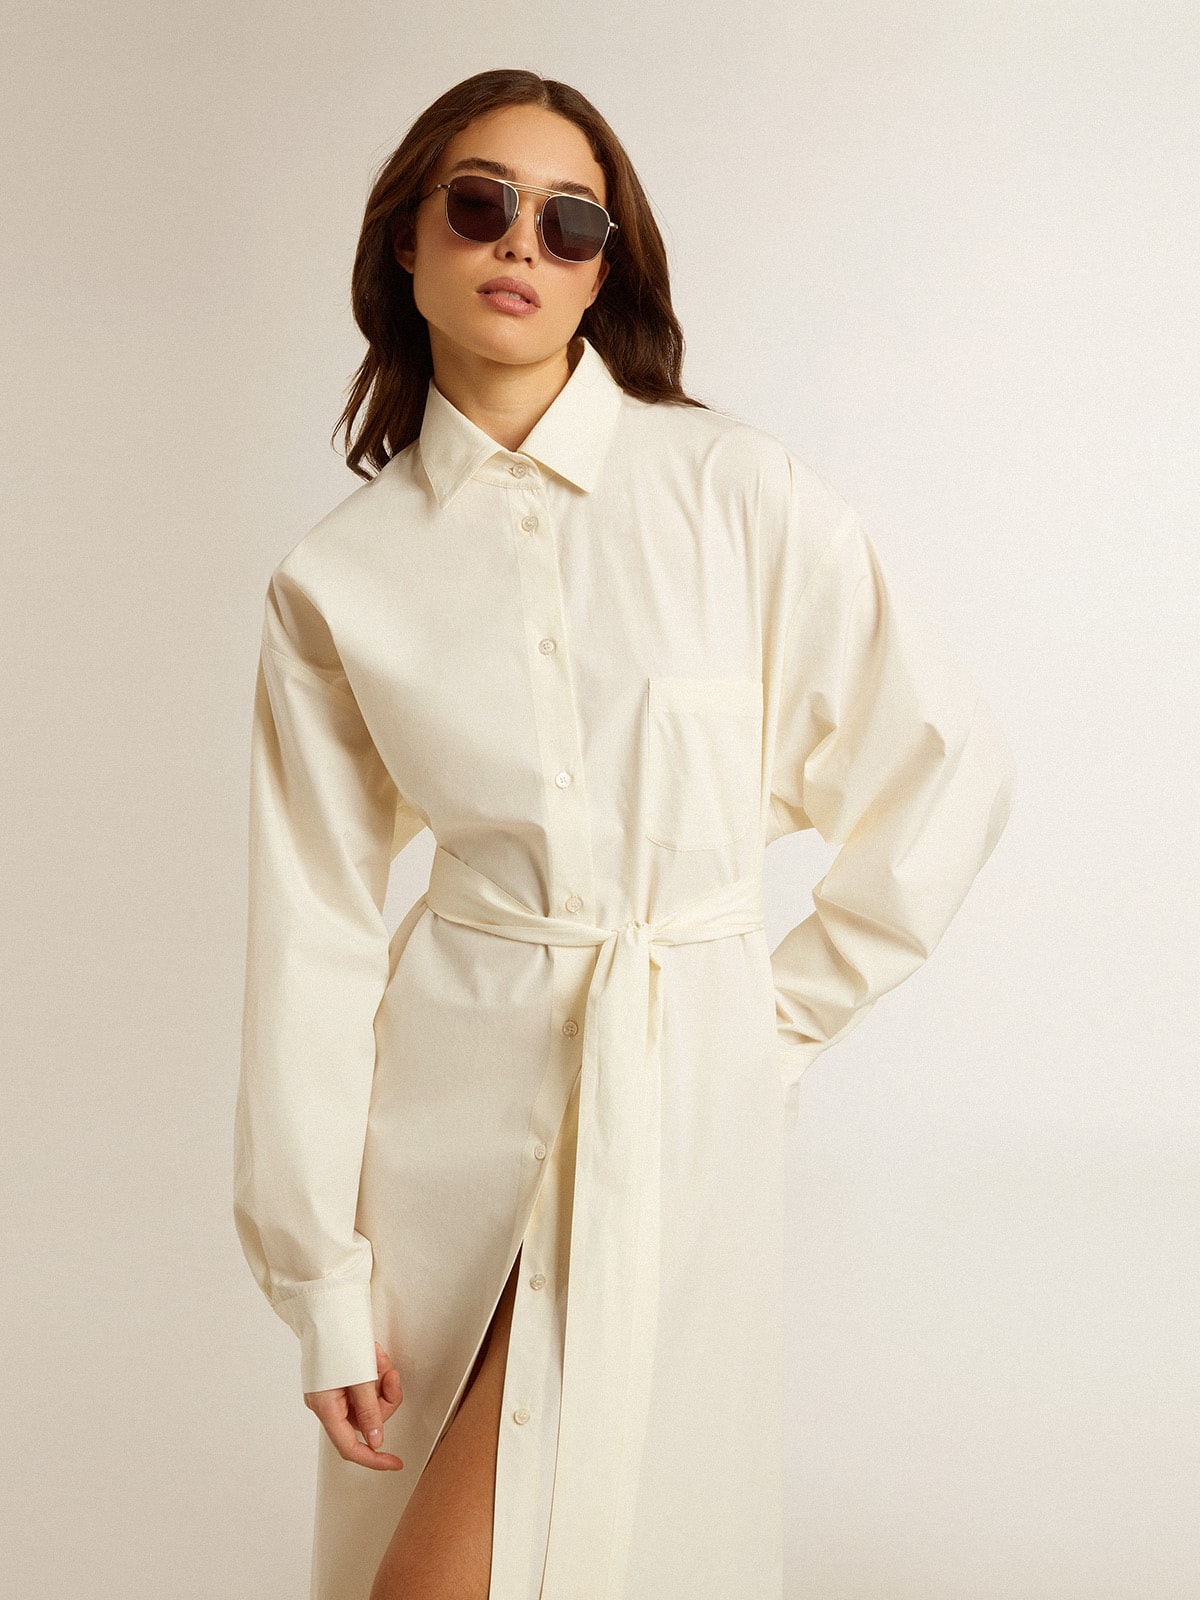 Long shirt dress in solid color cotton poplin - 4